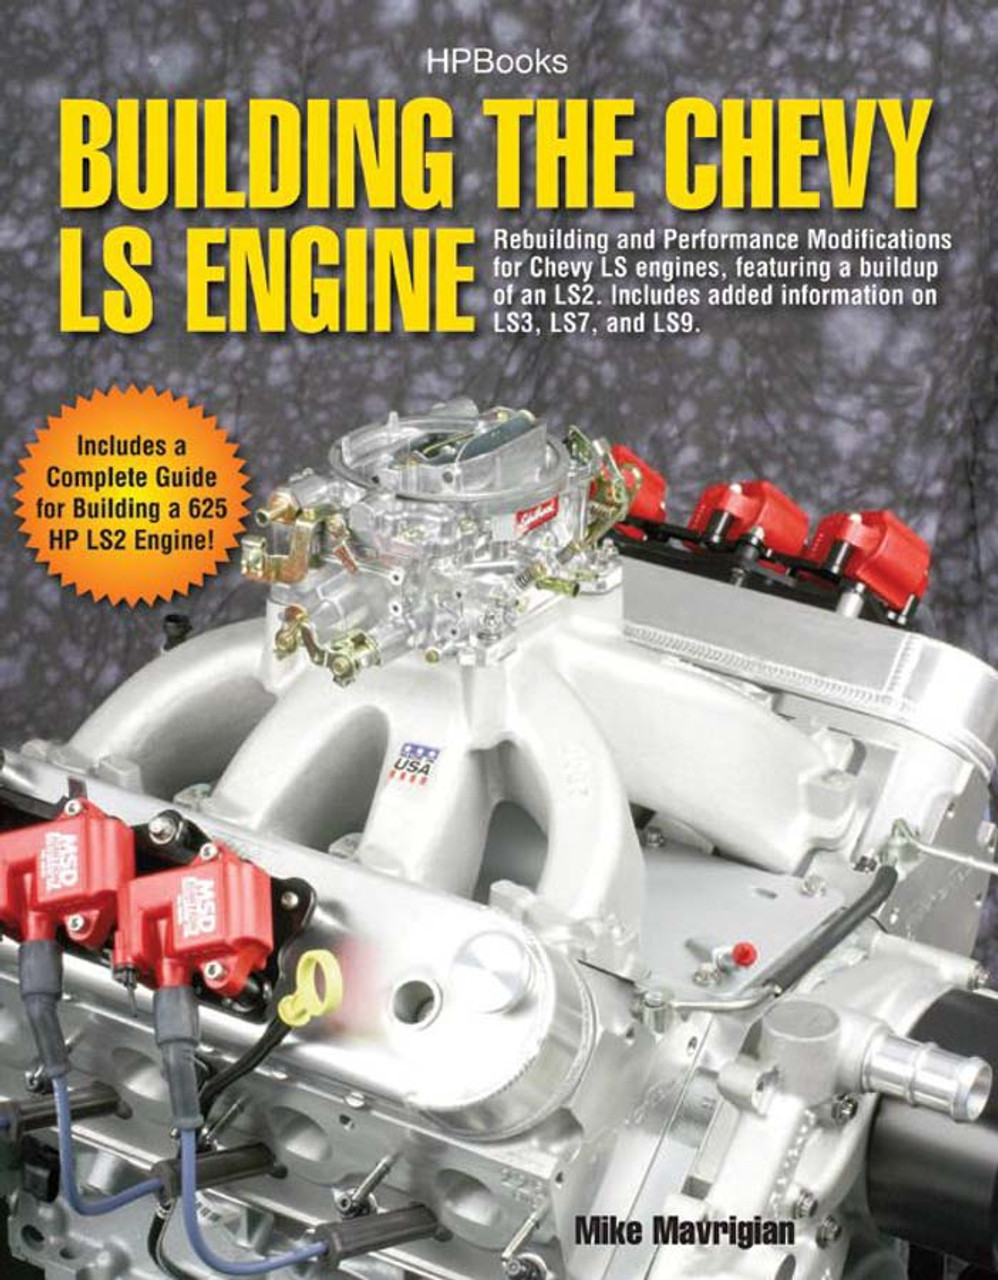 HP Books Building Chevy LS Engine Book - HPPHP1559